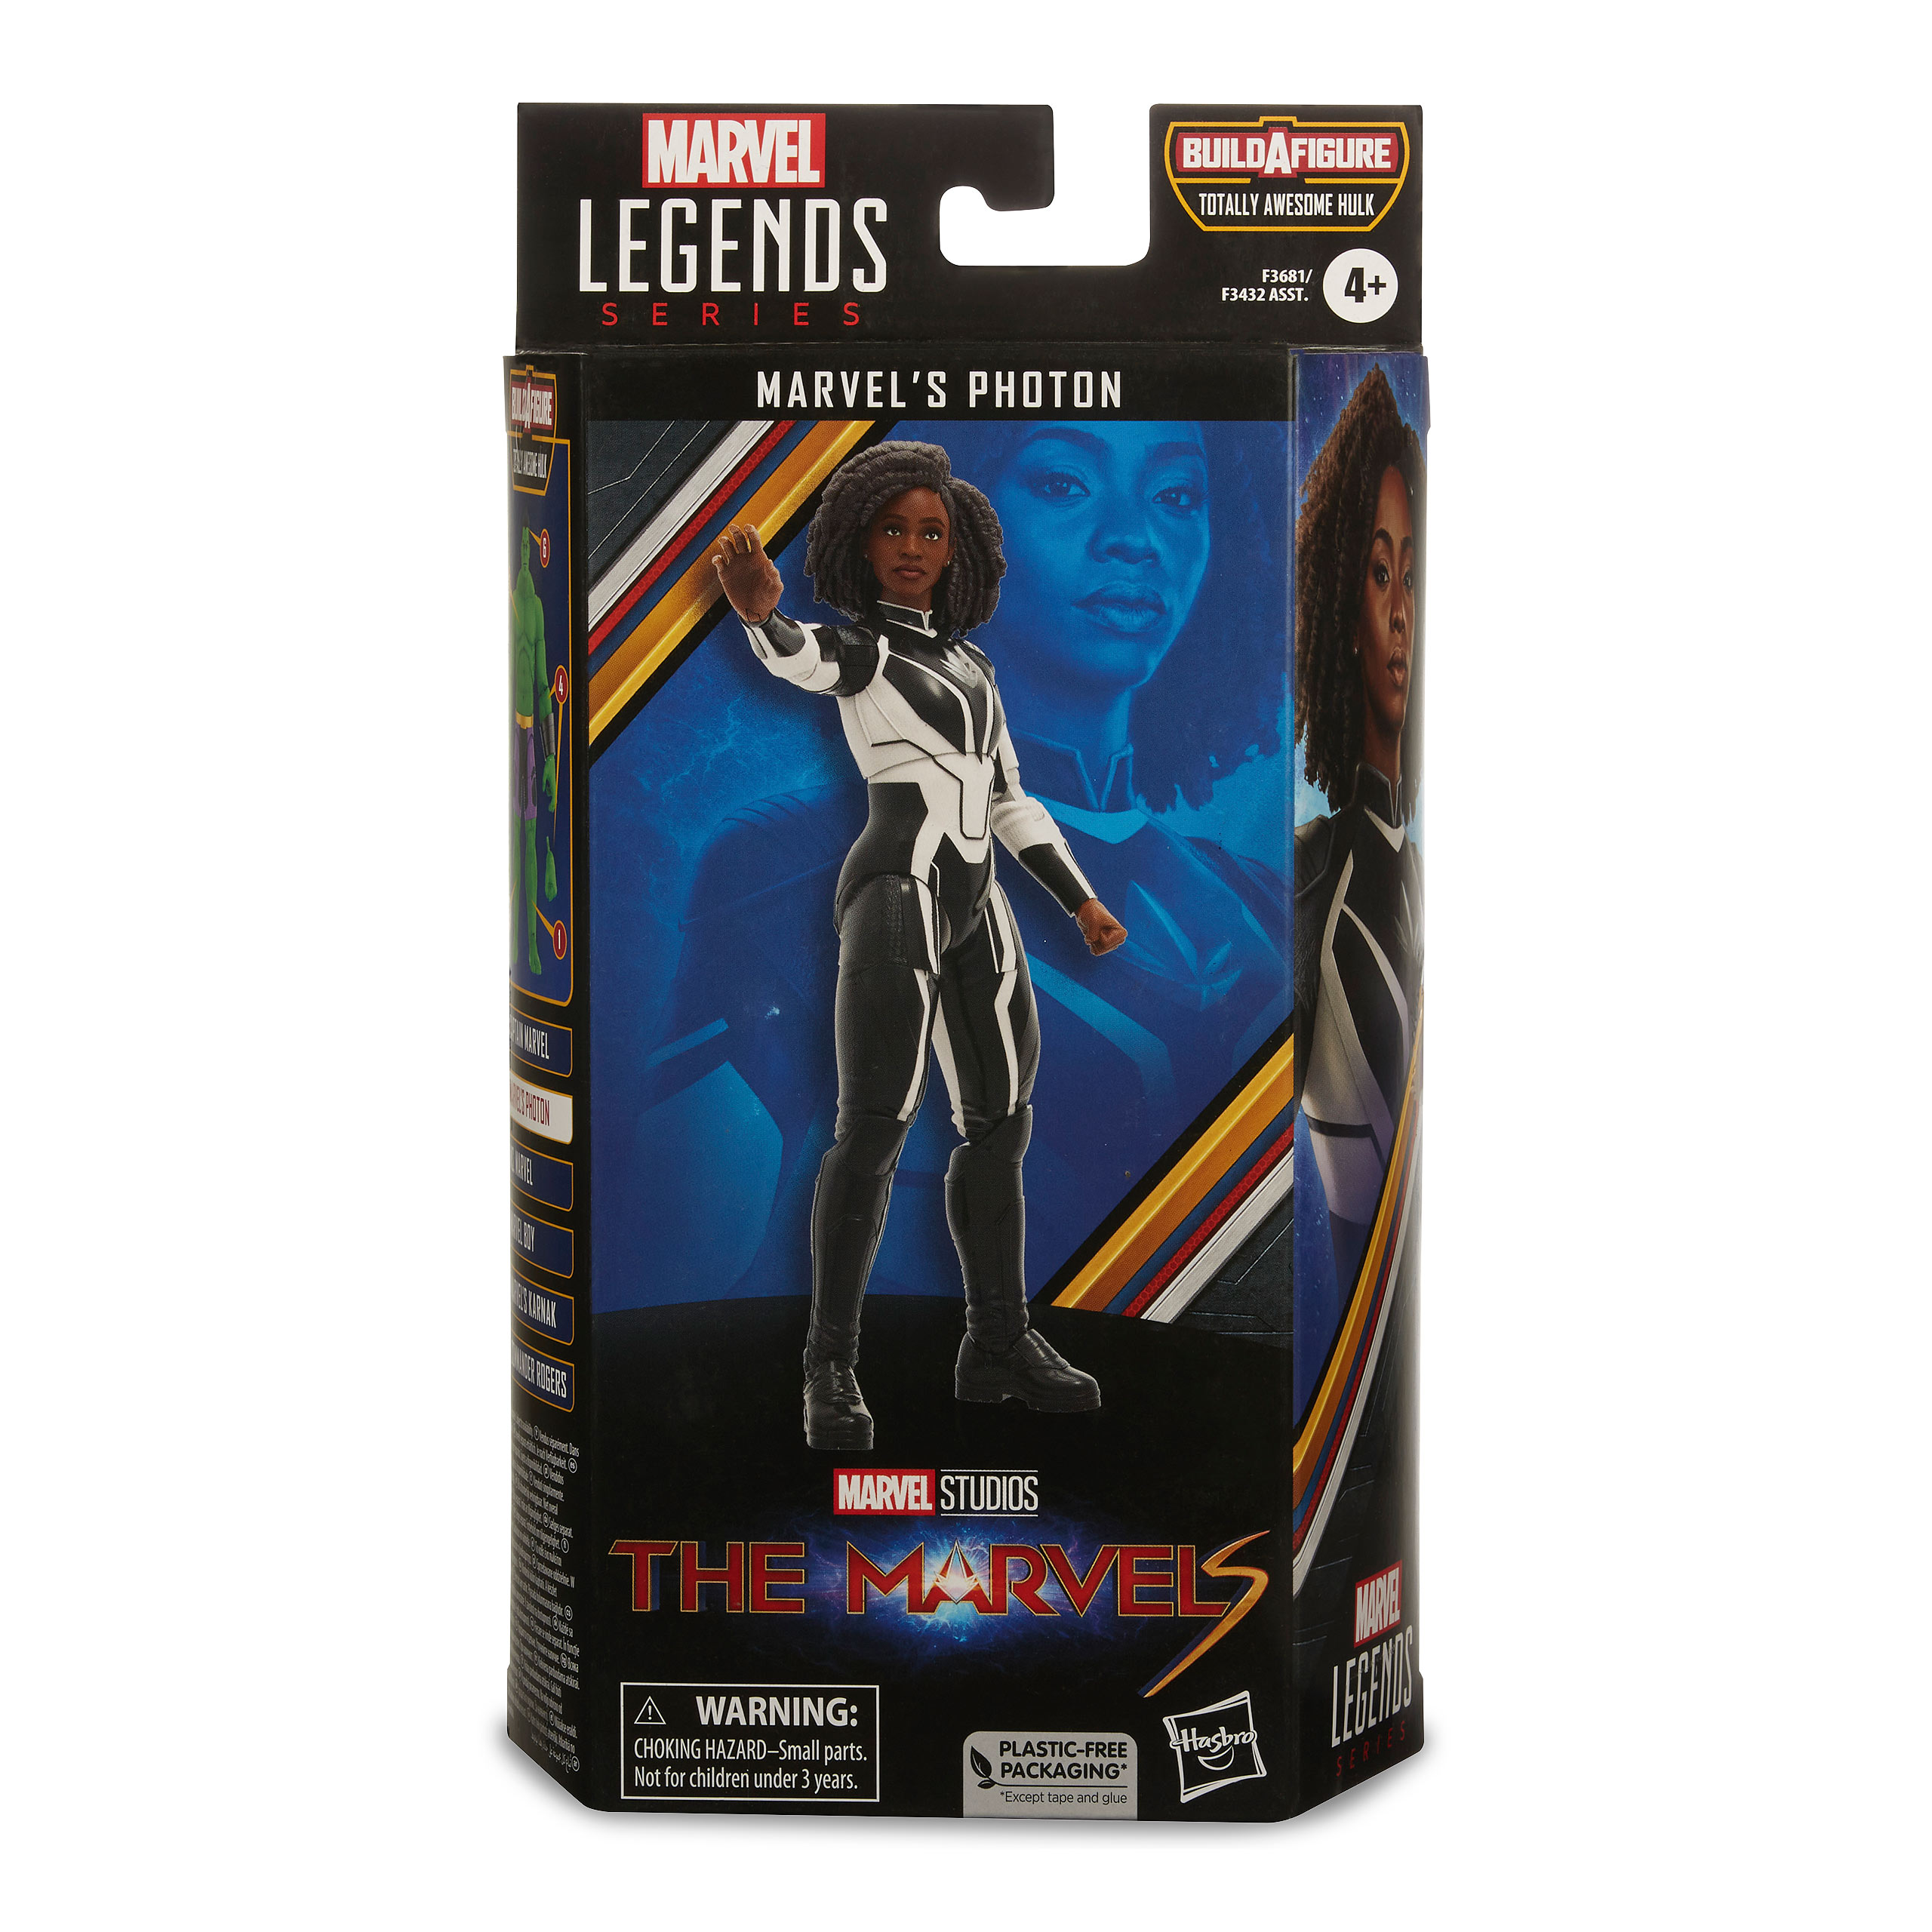 The Marvels - Marvel's Photon Action Figure